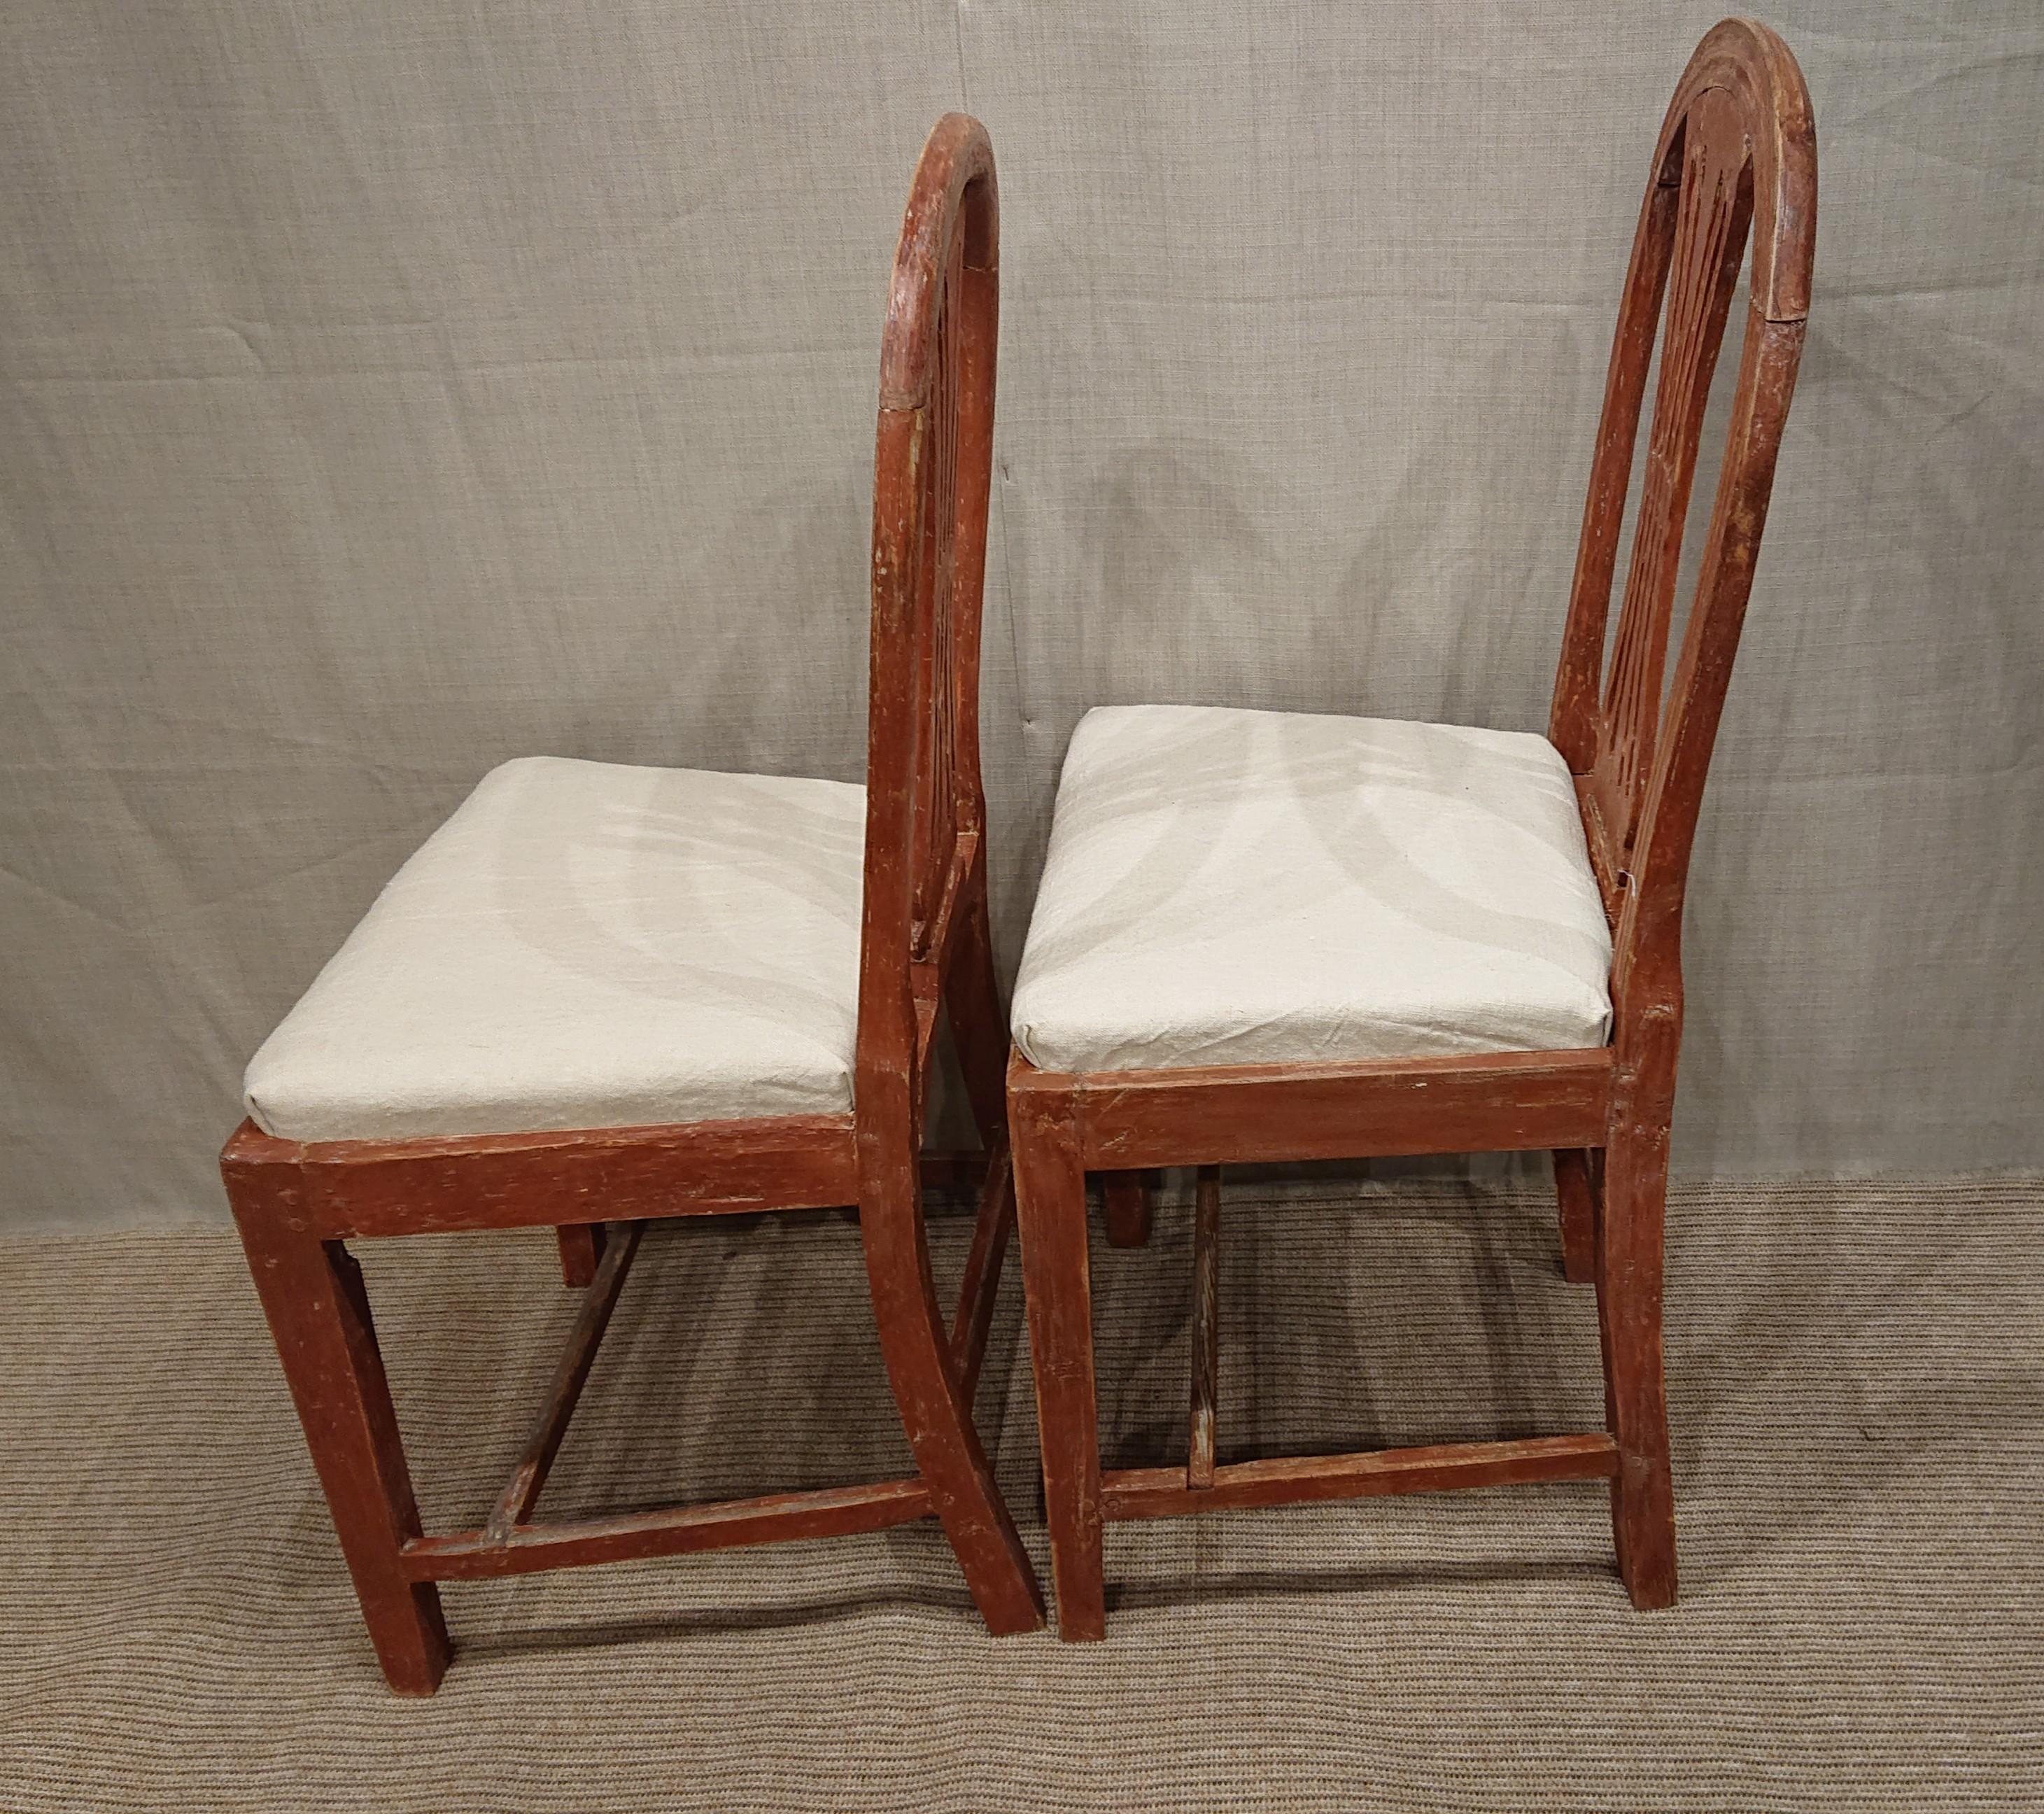 19th Century Swedish Gustavian Chairs with Original Paint Swedish Antiques For Sale 2